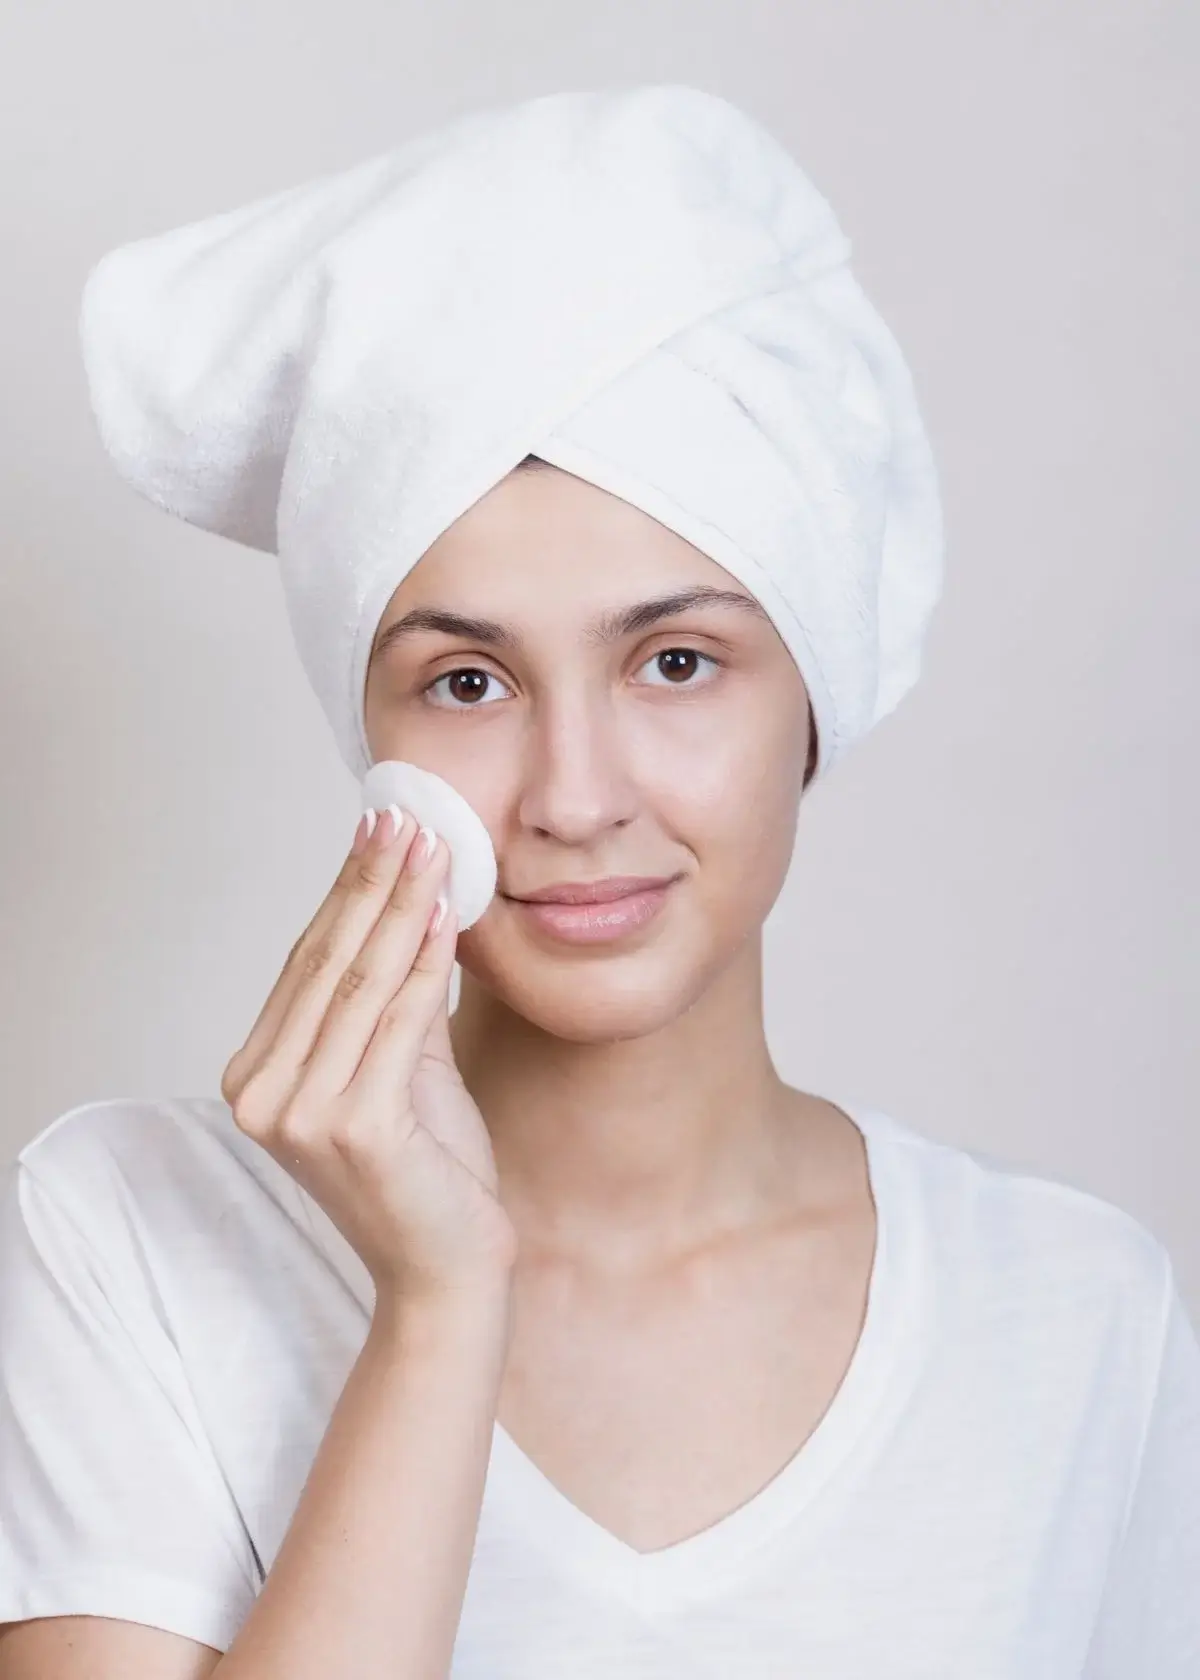 Can acne face wipes effectively remove makeup?